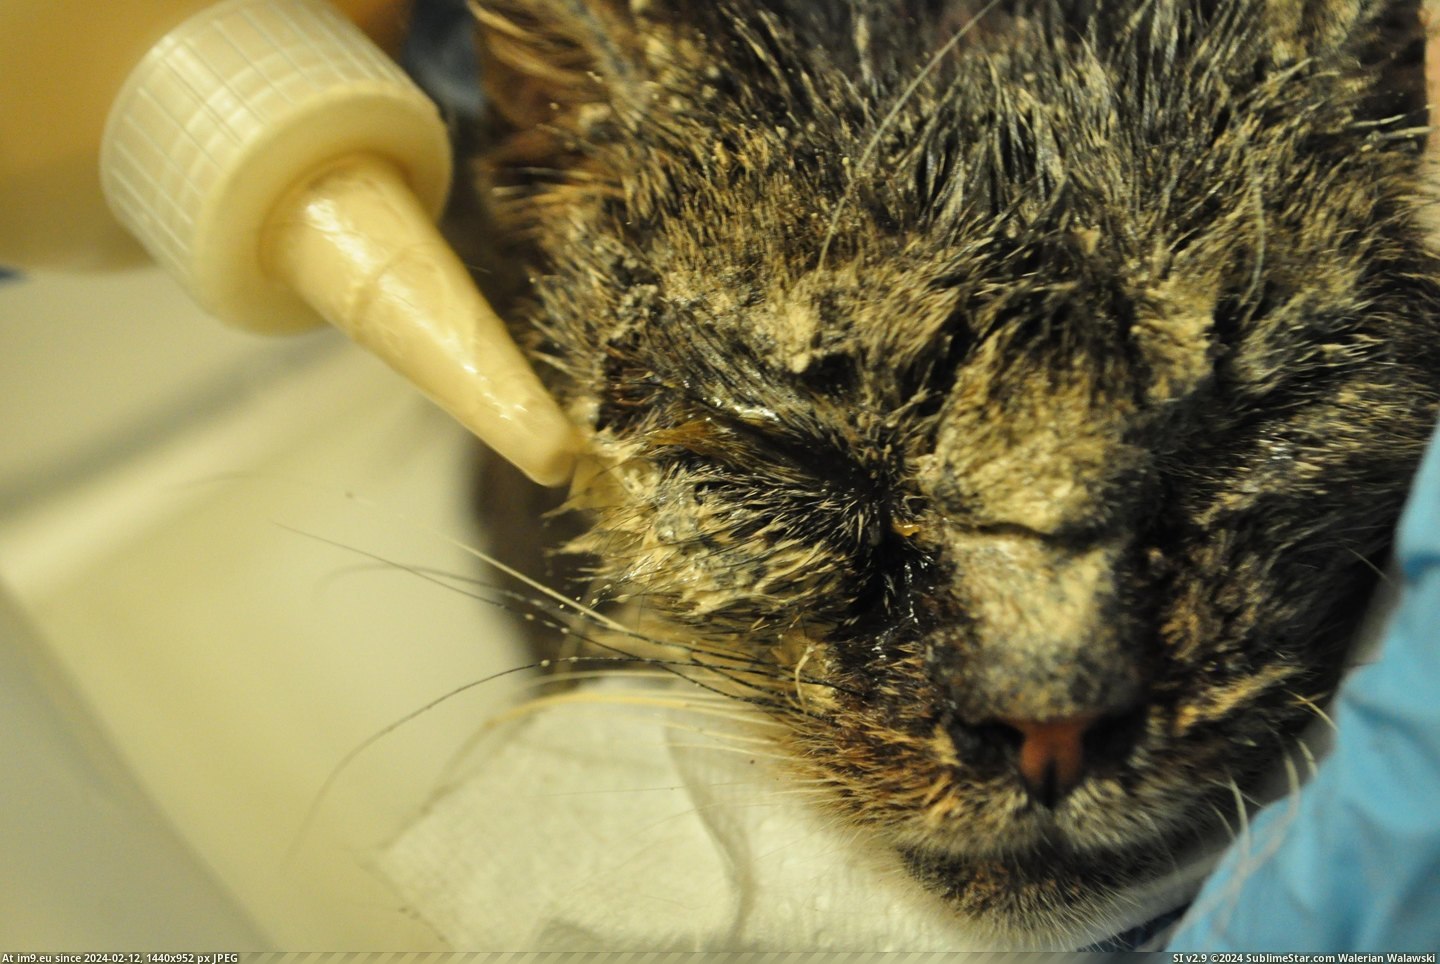 #Cats #Cat #Life #Helped #Dying #Blind #Starved #Kitten #Stray #Save [Cats] Mr. Cat - The Dying, Starved, and Blind Stray Kitten we found, and how Reddit helped save his life. 1 Pic. (Obraz z album My r/CATS favs))